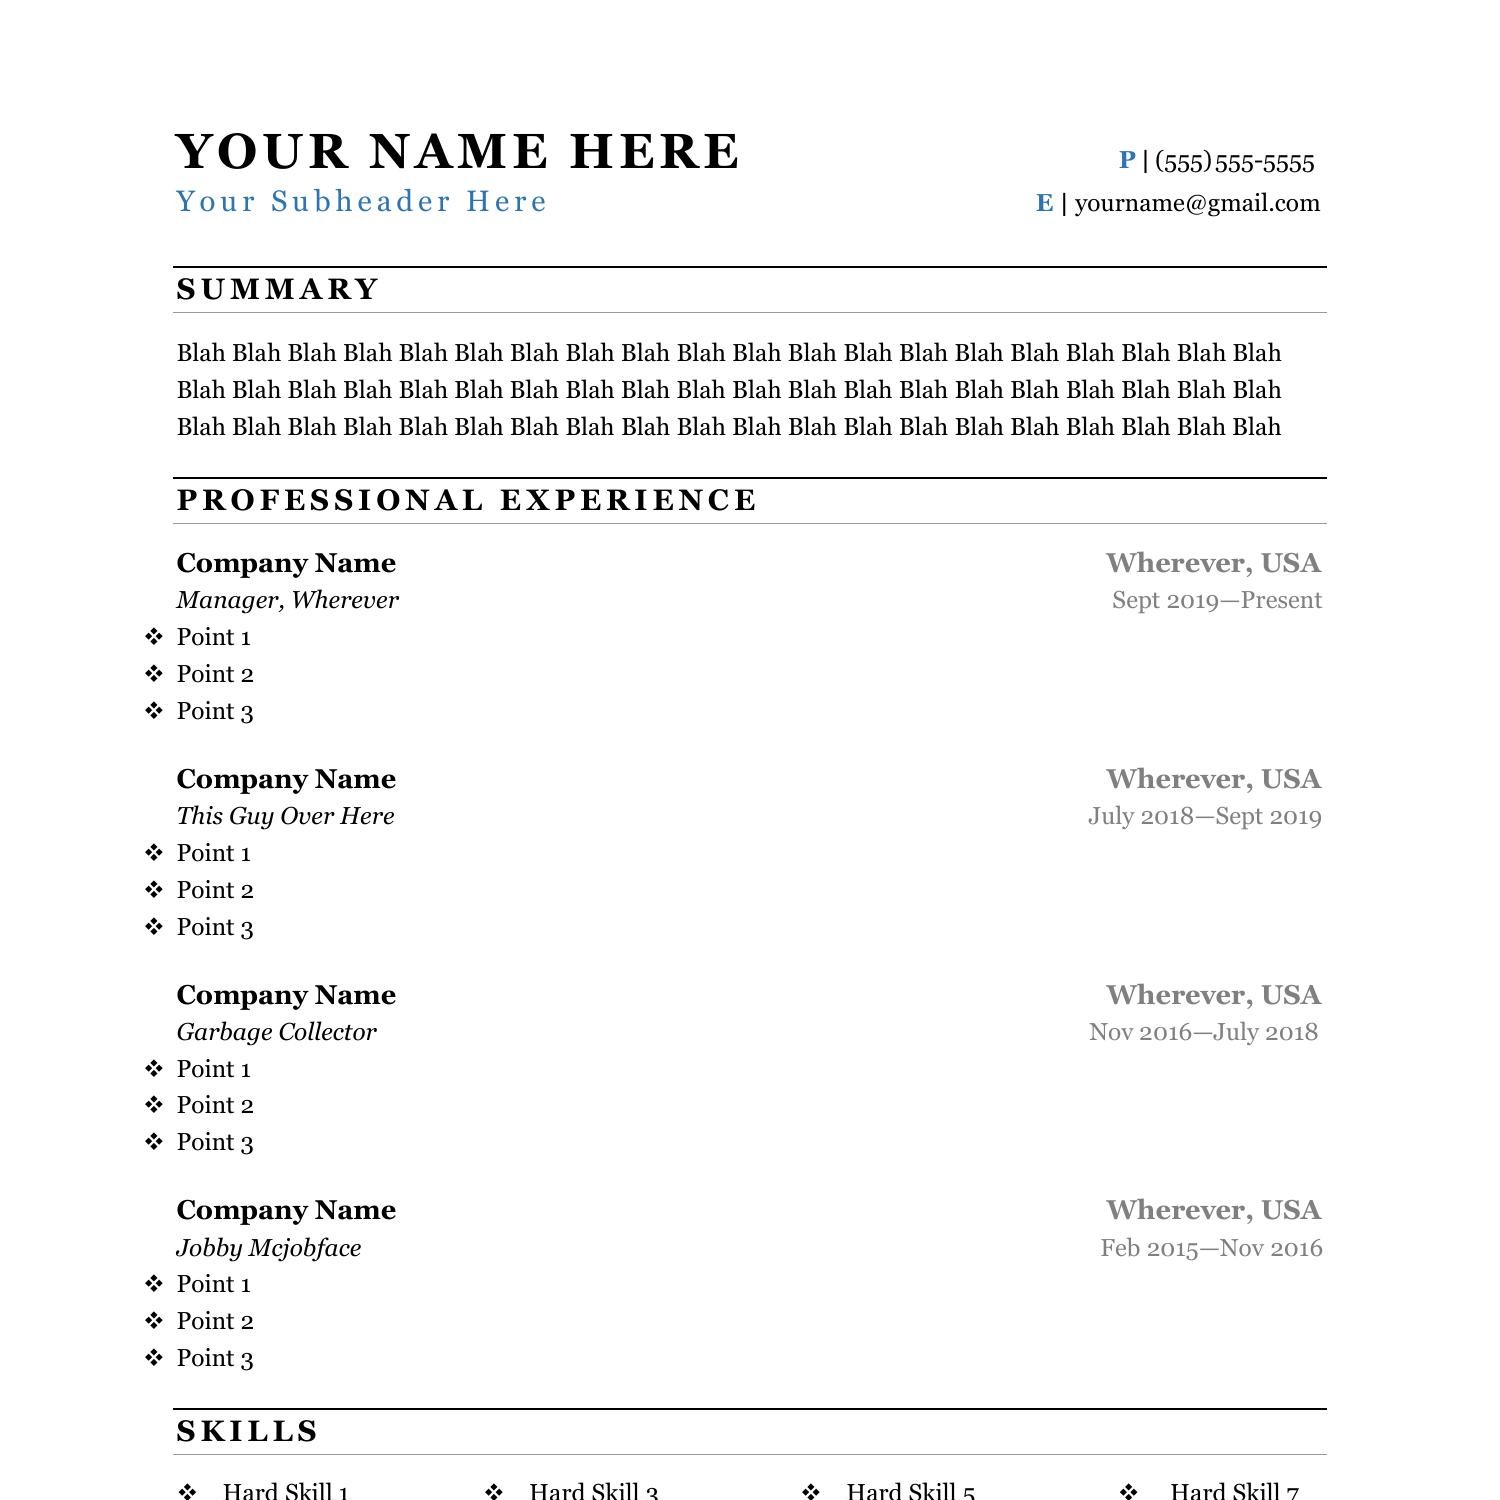 free-resume-downloads-no-cost-free-resume-templates-resume-examples-samples-cv-resume-format